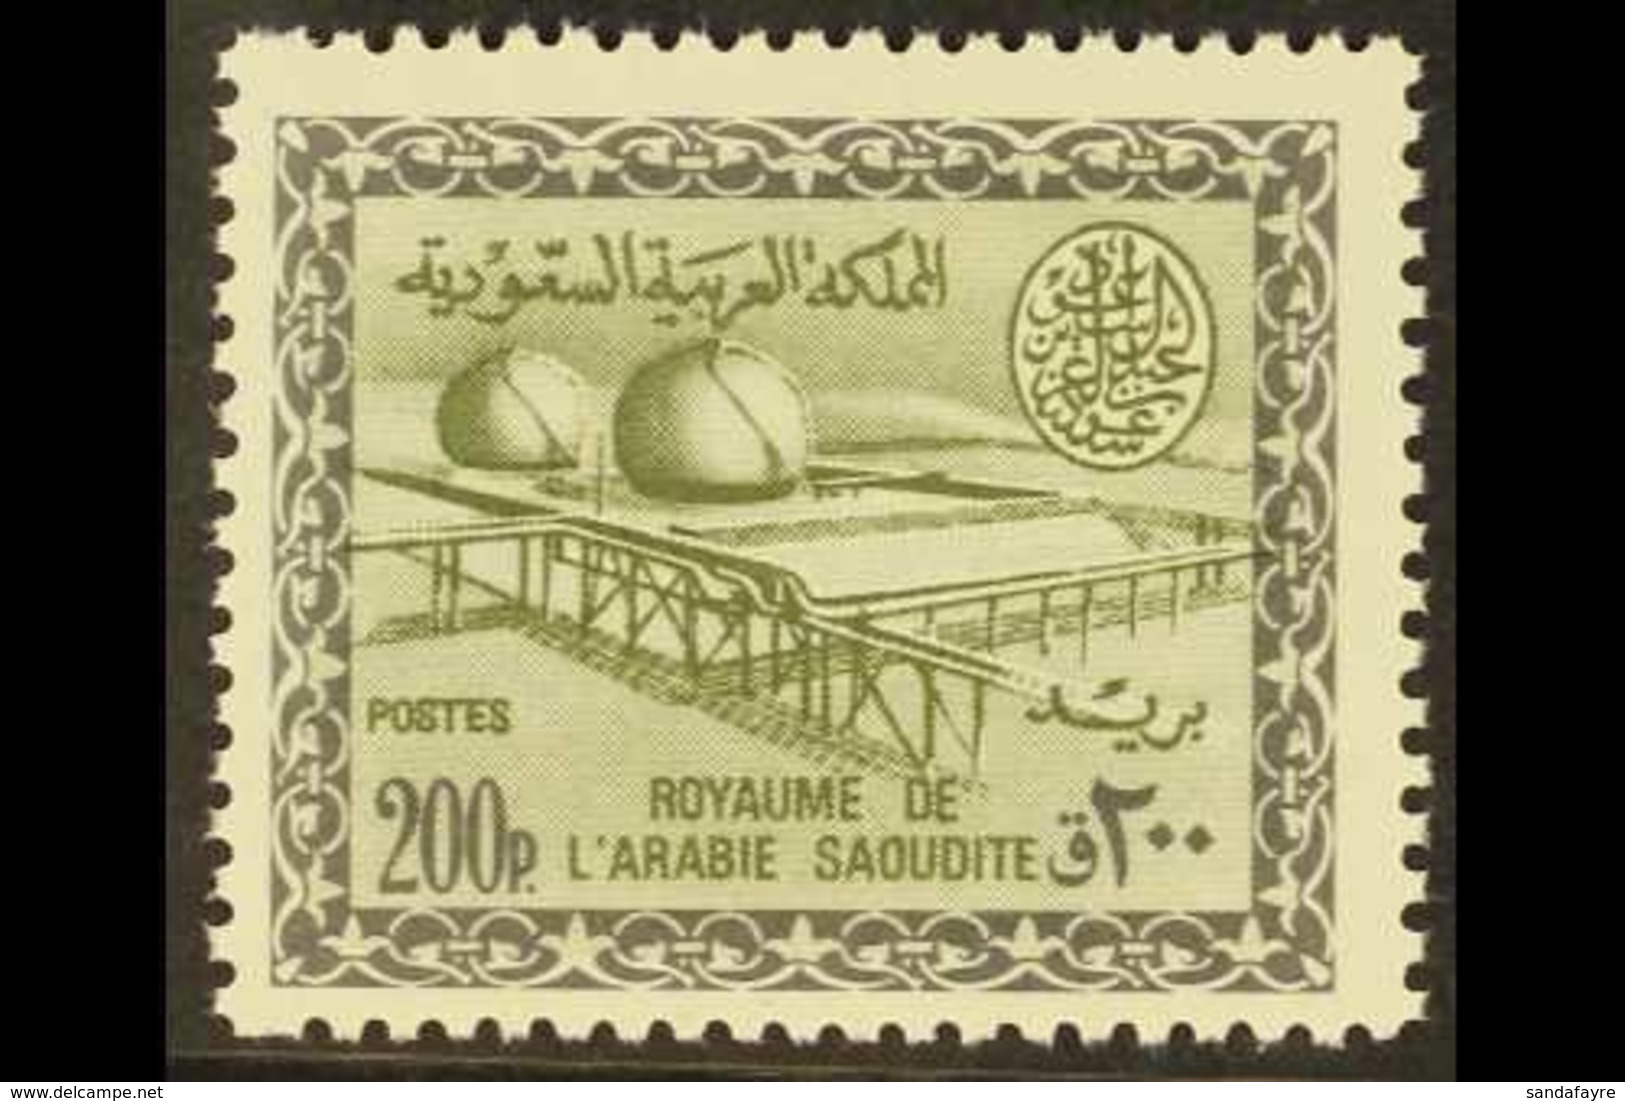 1964-72  200p Bronze Green & Slate "Gas Oil Plant", SG 556, Never Hinged Mint For More Images, Please Visit Http://www.s - Arabia Saudita